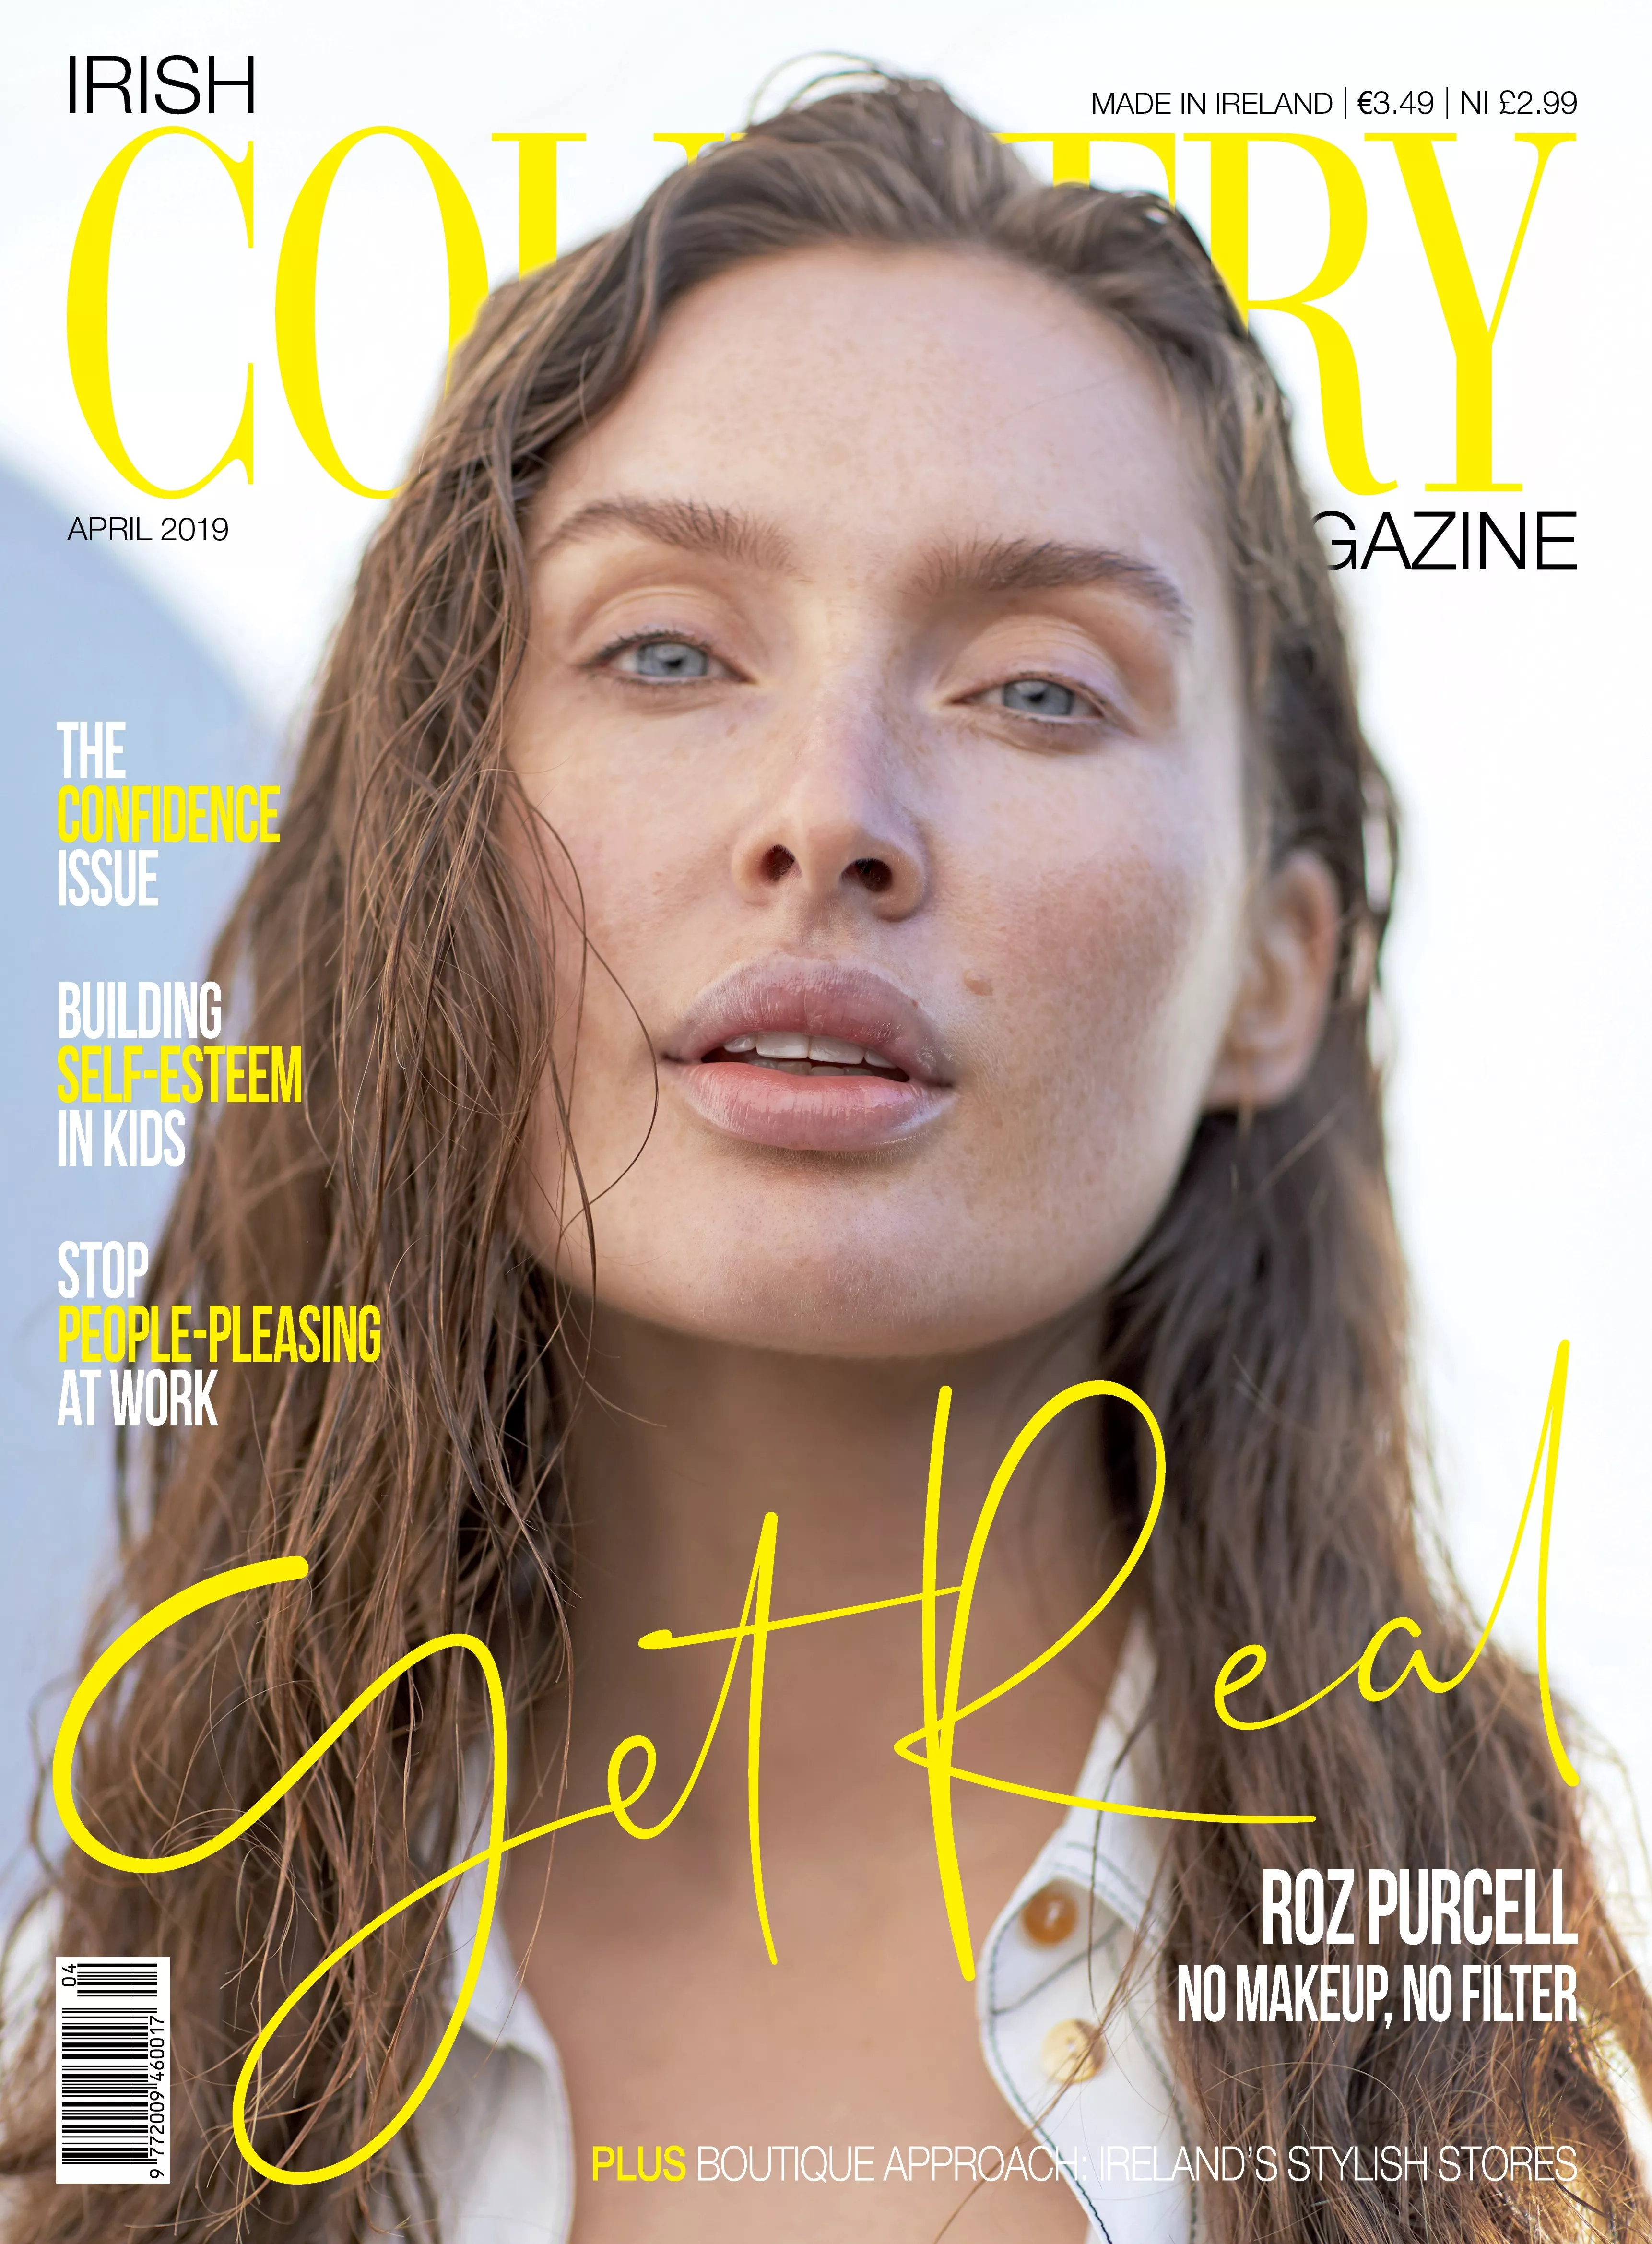 Roz Purcell jokes about being 'orange' as she goes make-up free for magazine cover